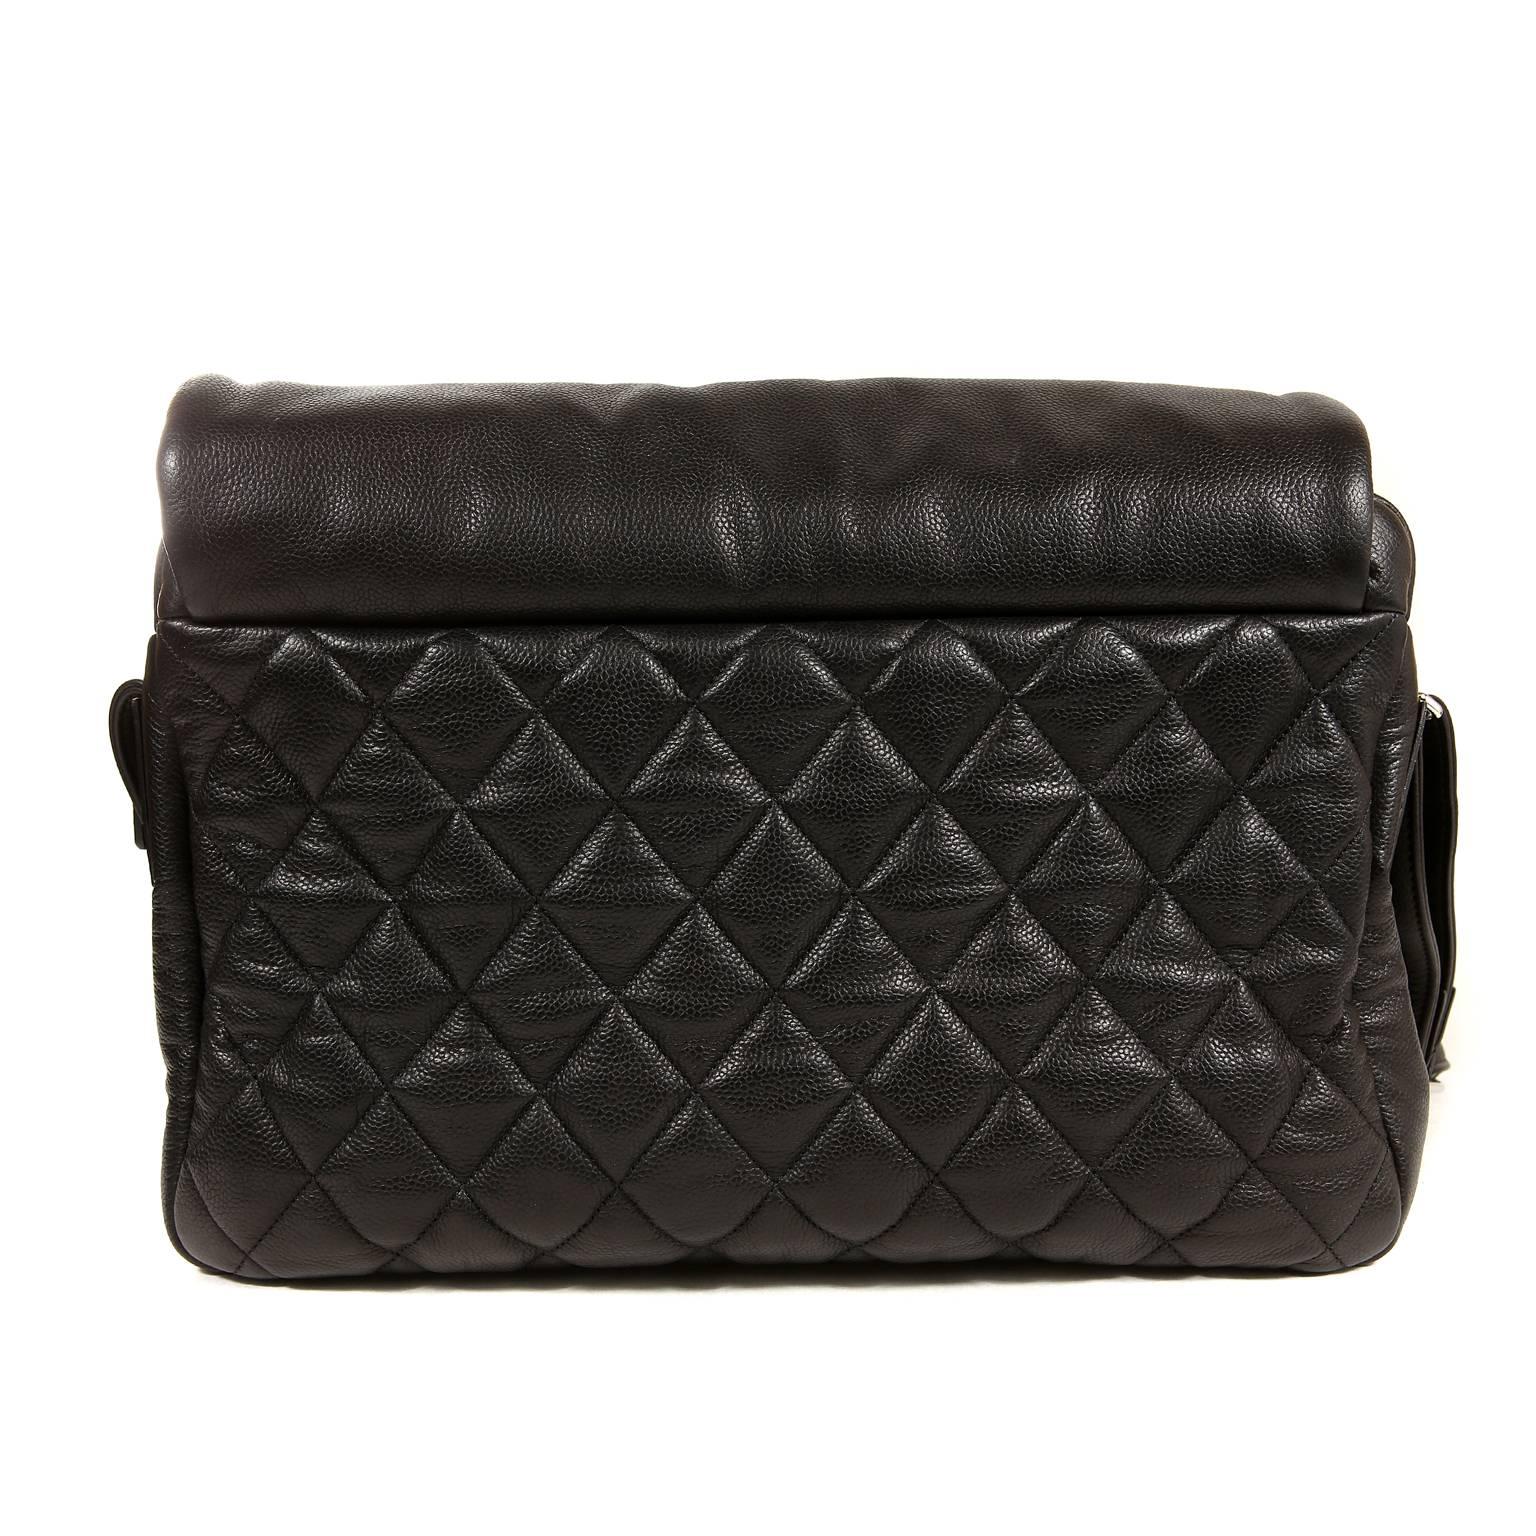 Chanel Black Caviar Messenger Bag - PRISTINE;  never before carried. 
Only available in the Paris Chanel boutiques in leather, this caviar version is a fantastic find. From the Coco Cocoon Collection.  
Unisex large messenger flap bag in durable